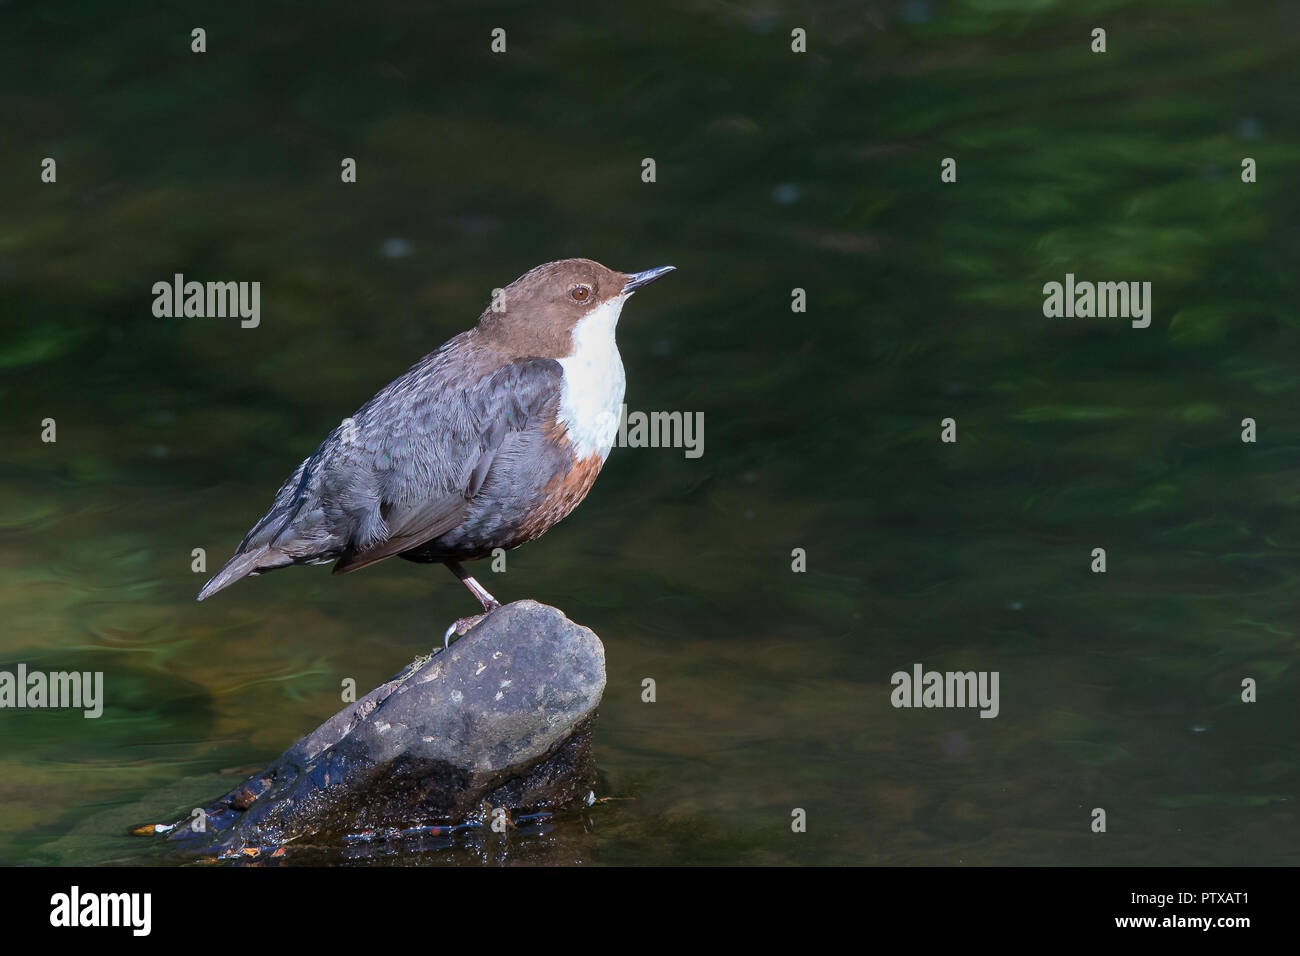 Detailed, side view close up of wild UK dipper bird (Cinclus cinclus) isolated on rock by shallow water of woodland stream, looking up in summer sun. Stock Photo